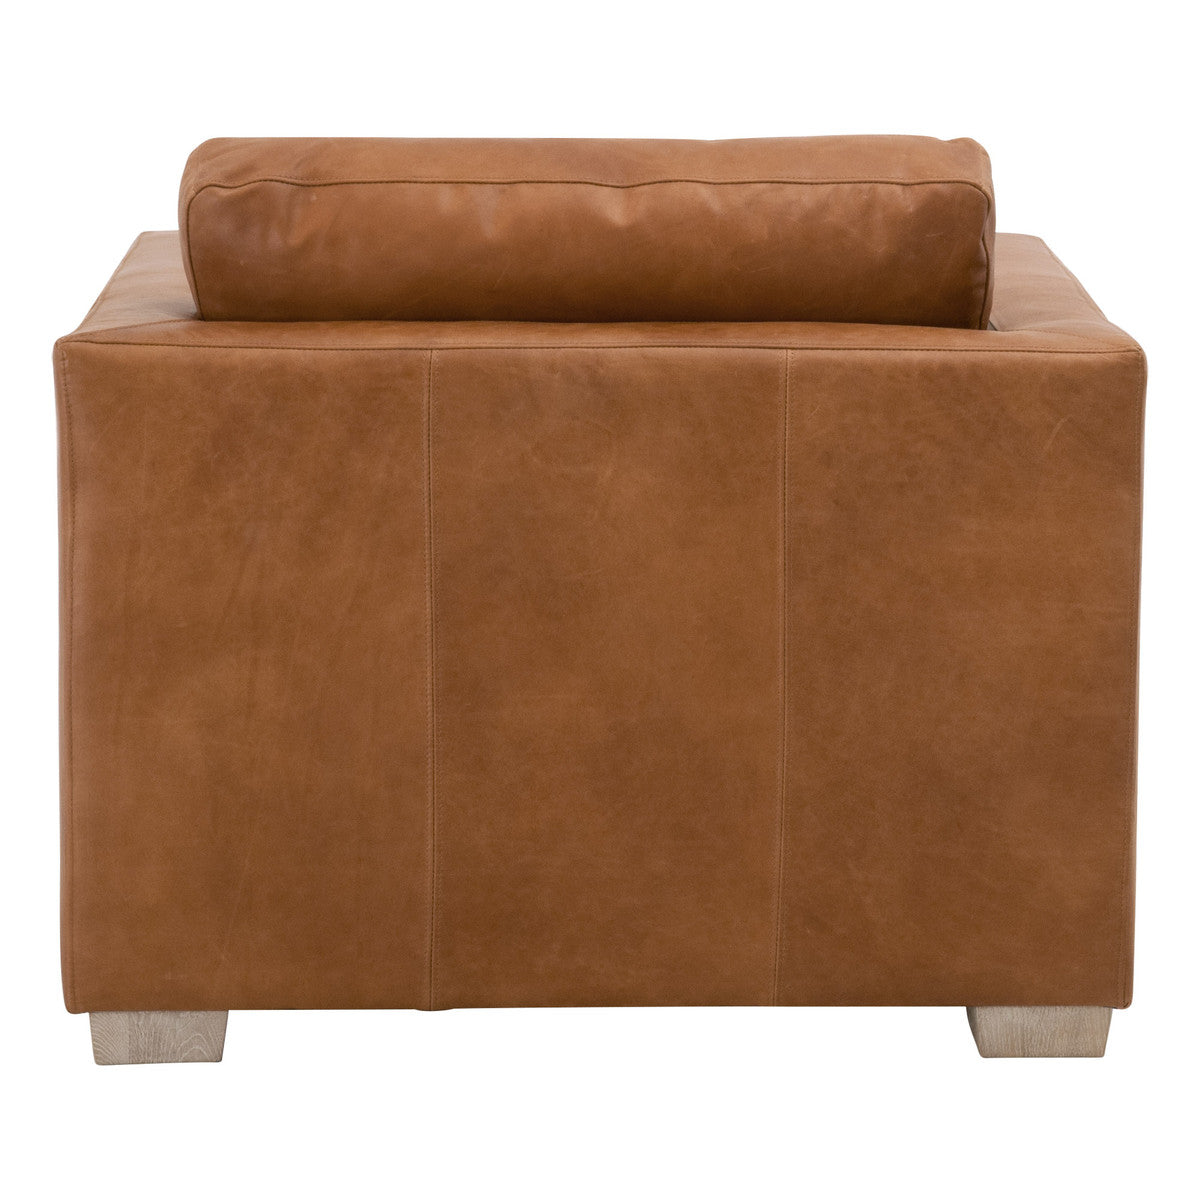 Hayden Leather Taper Arm Sofa Chair